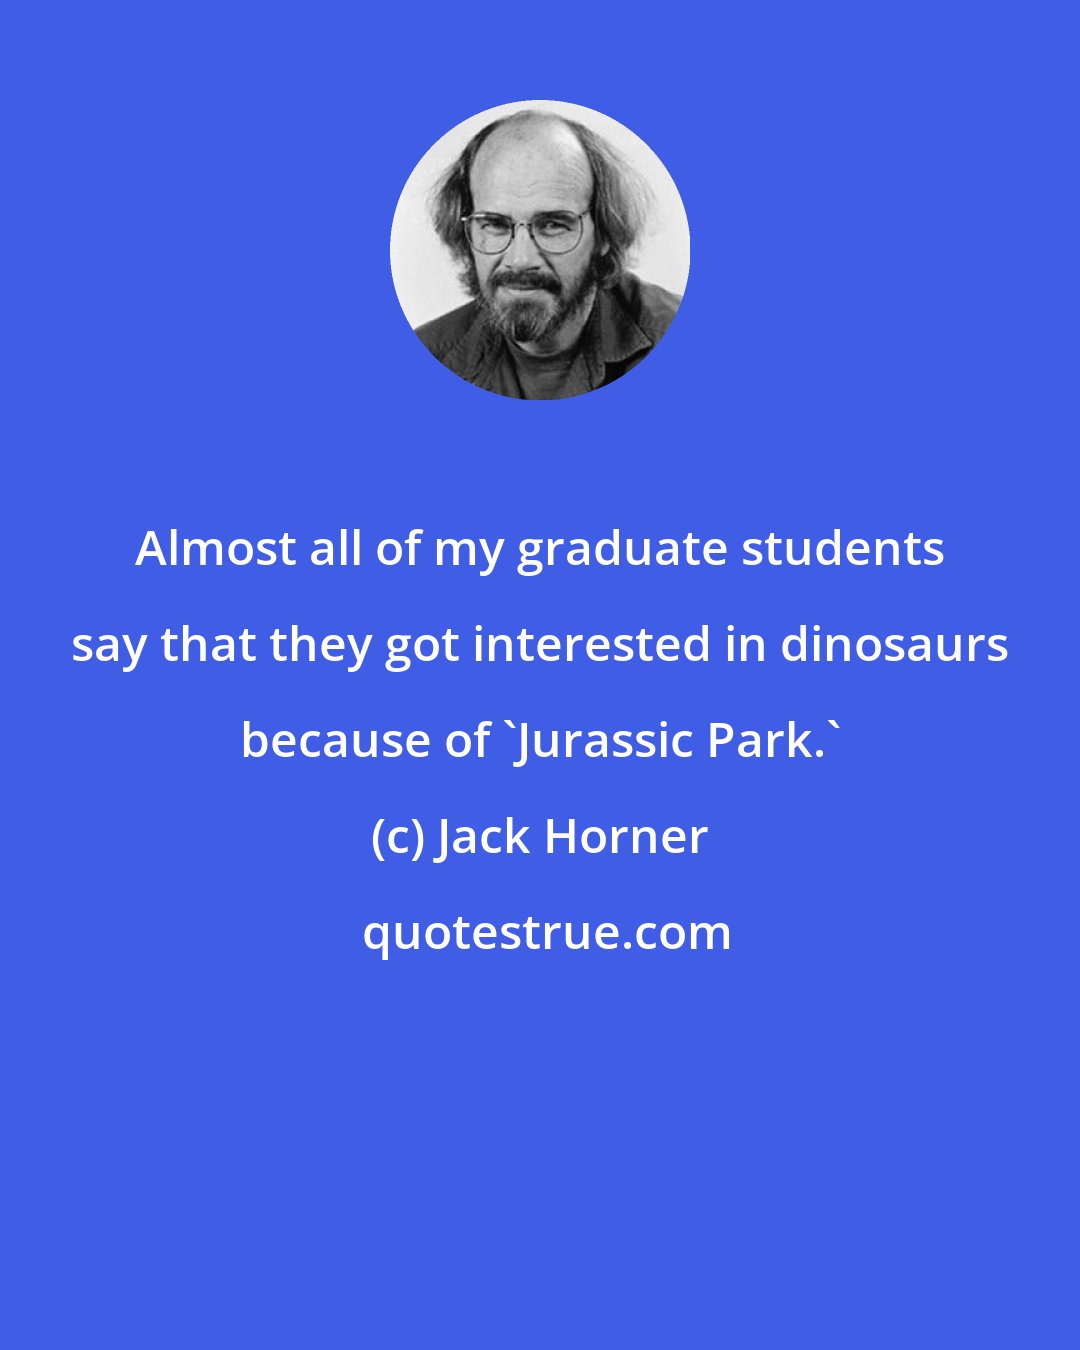 Jack Horner: Almost all of my graduate students say that they got interested in dinosaurs because of 'Jurassic Park.'